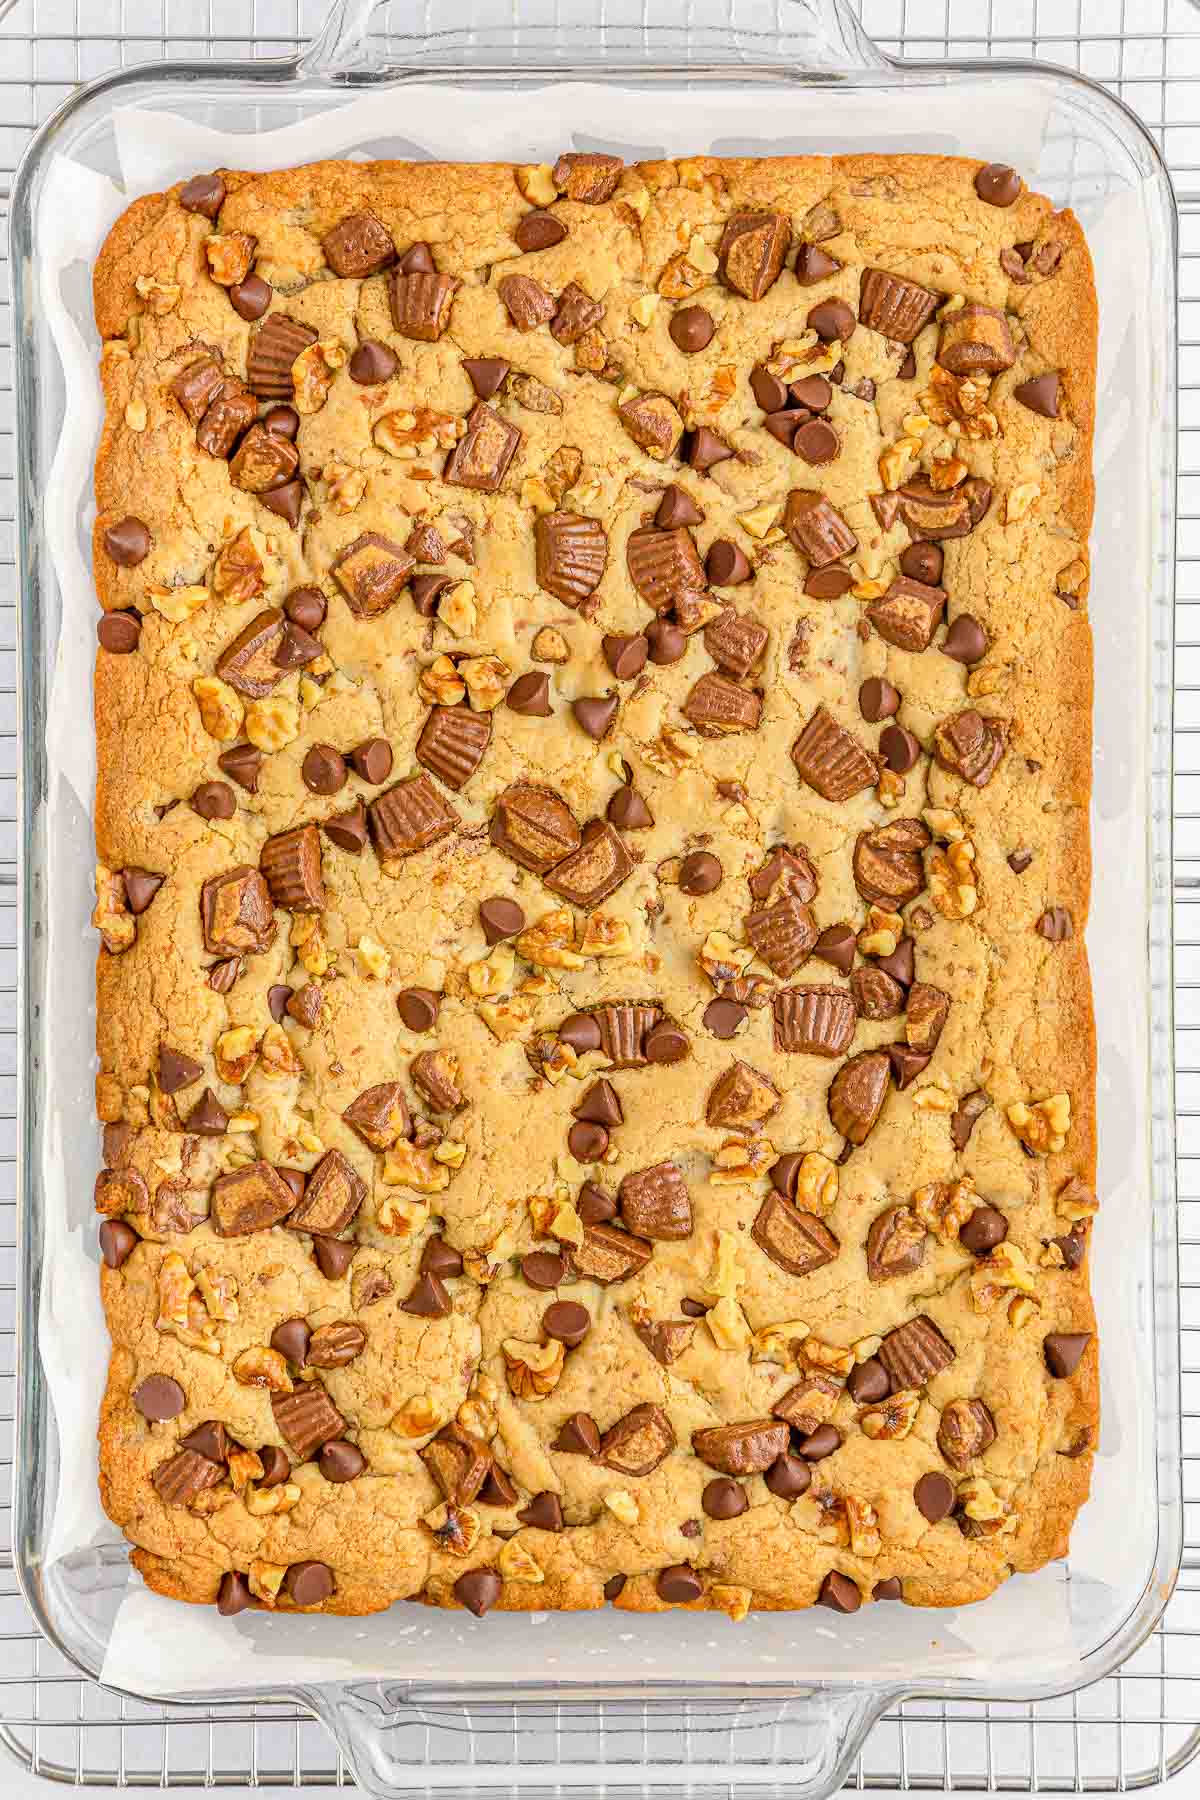 rectangle glass baking dish with peanut butter cup cookie bars.